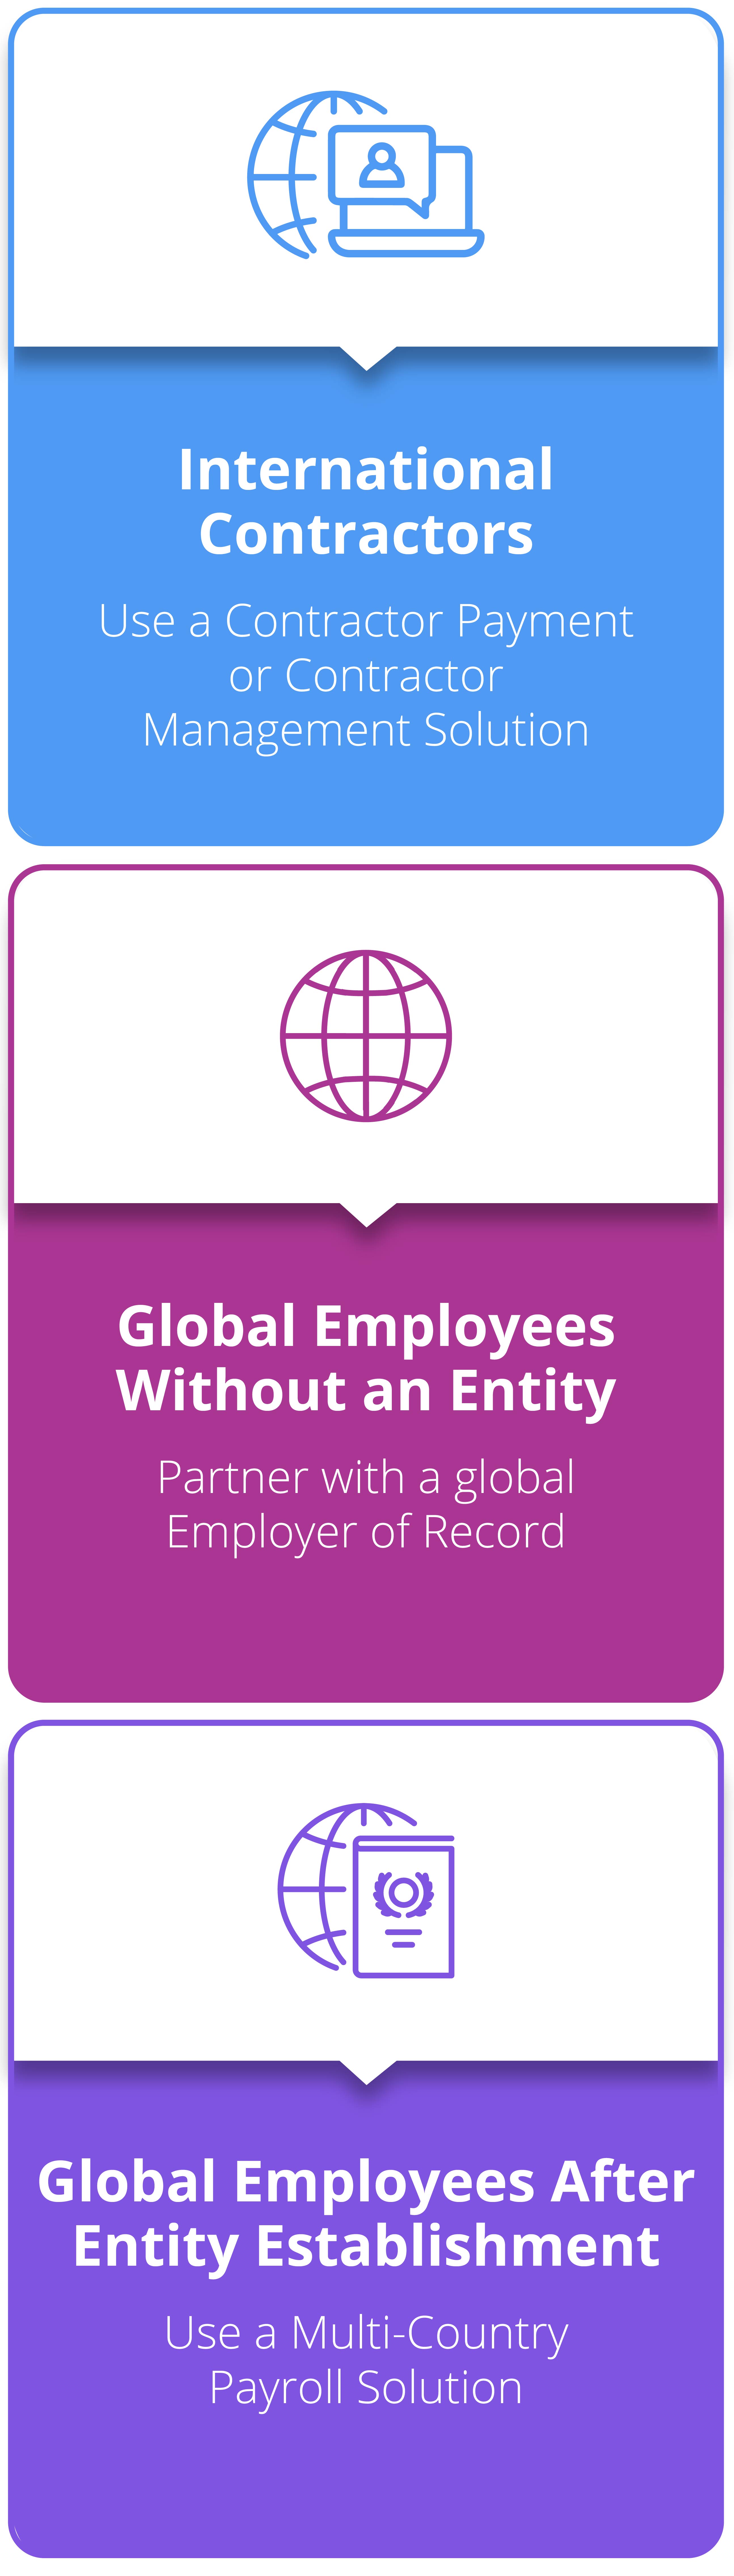 In post graphic outlining the three ways to pay international talent: paying international contractors, use a global employer of record, or set up an entity and use a multi country payroll provider